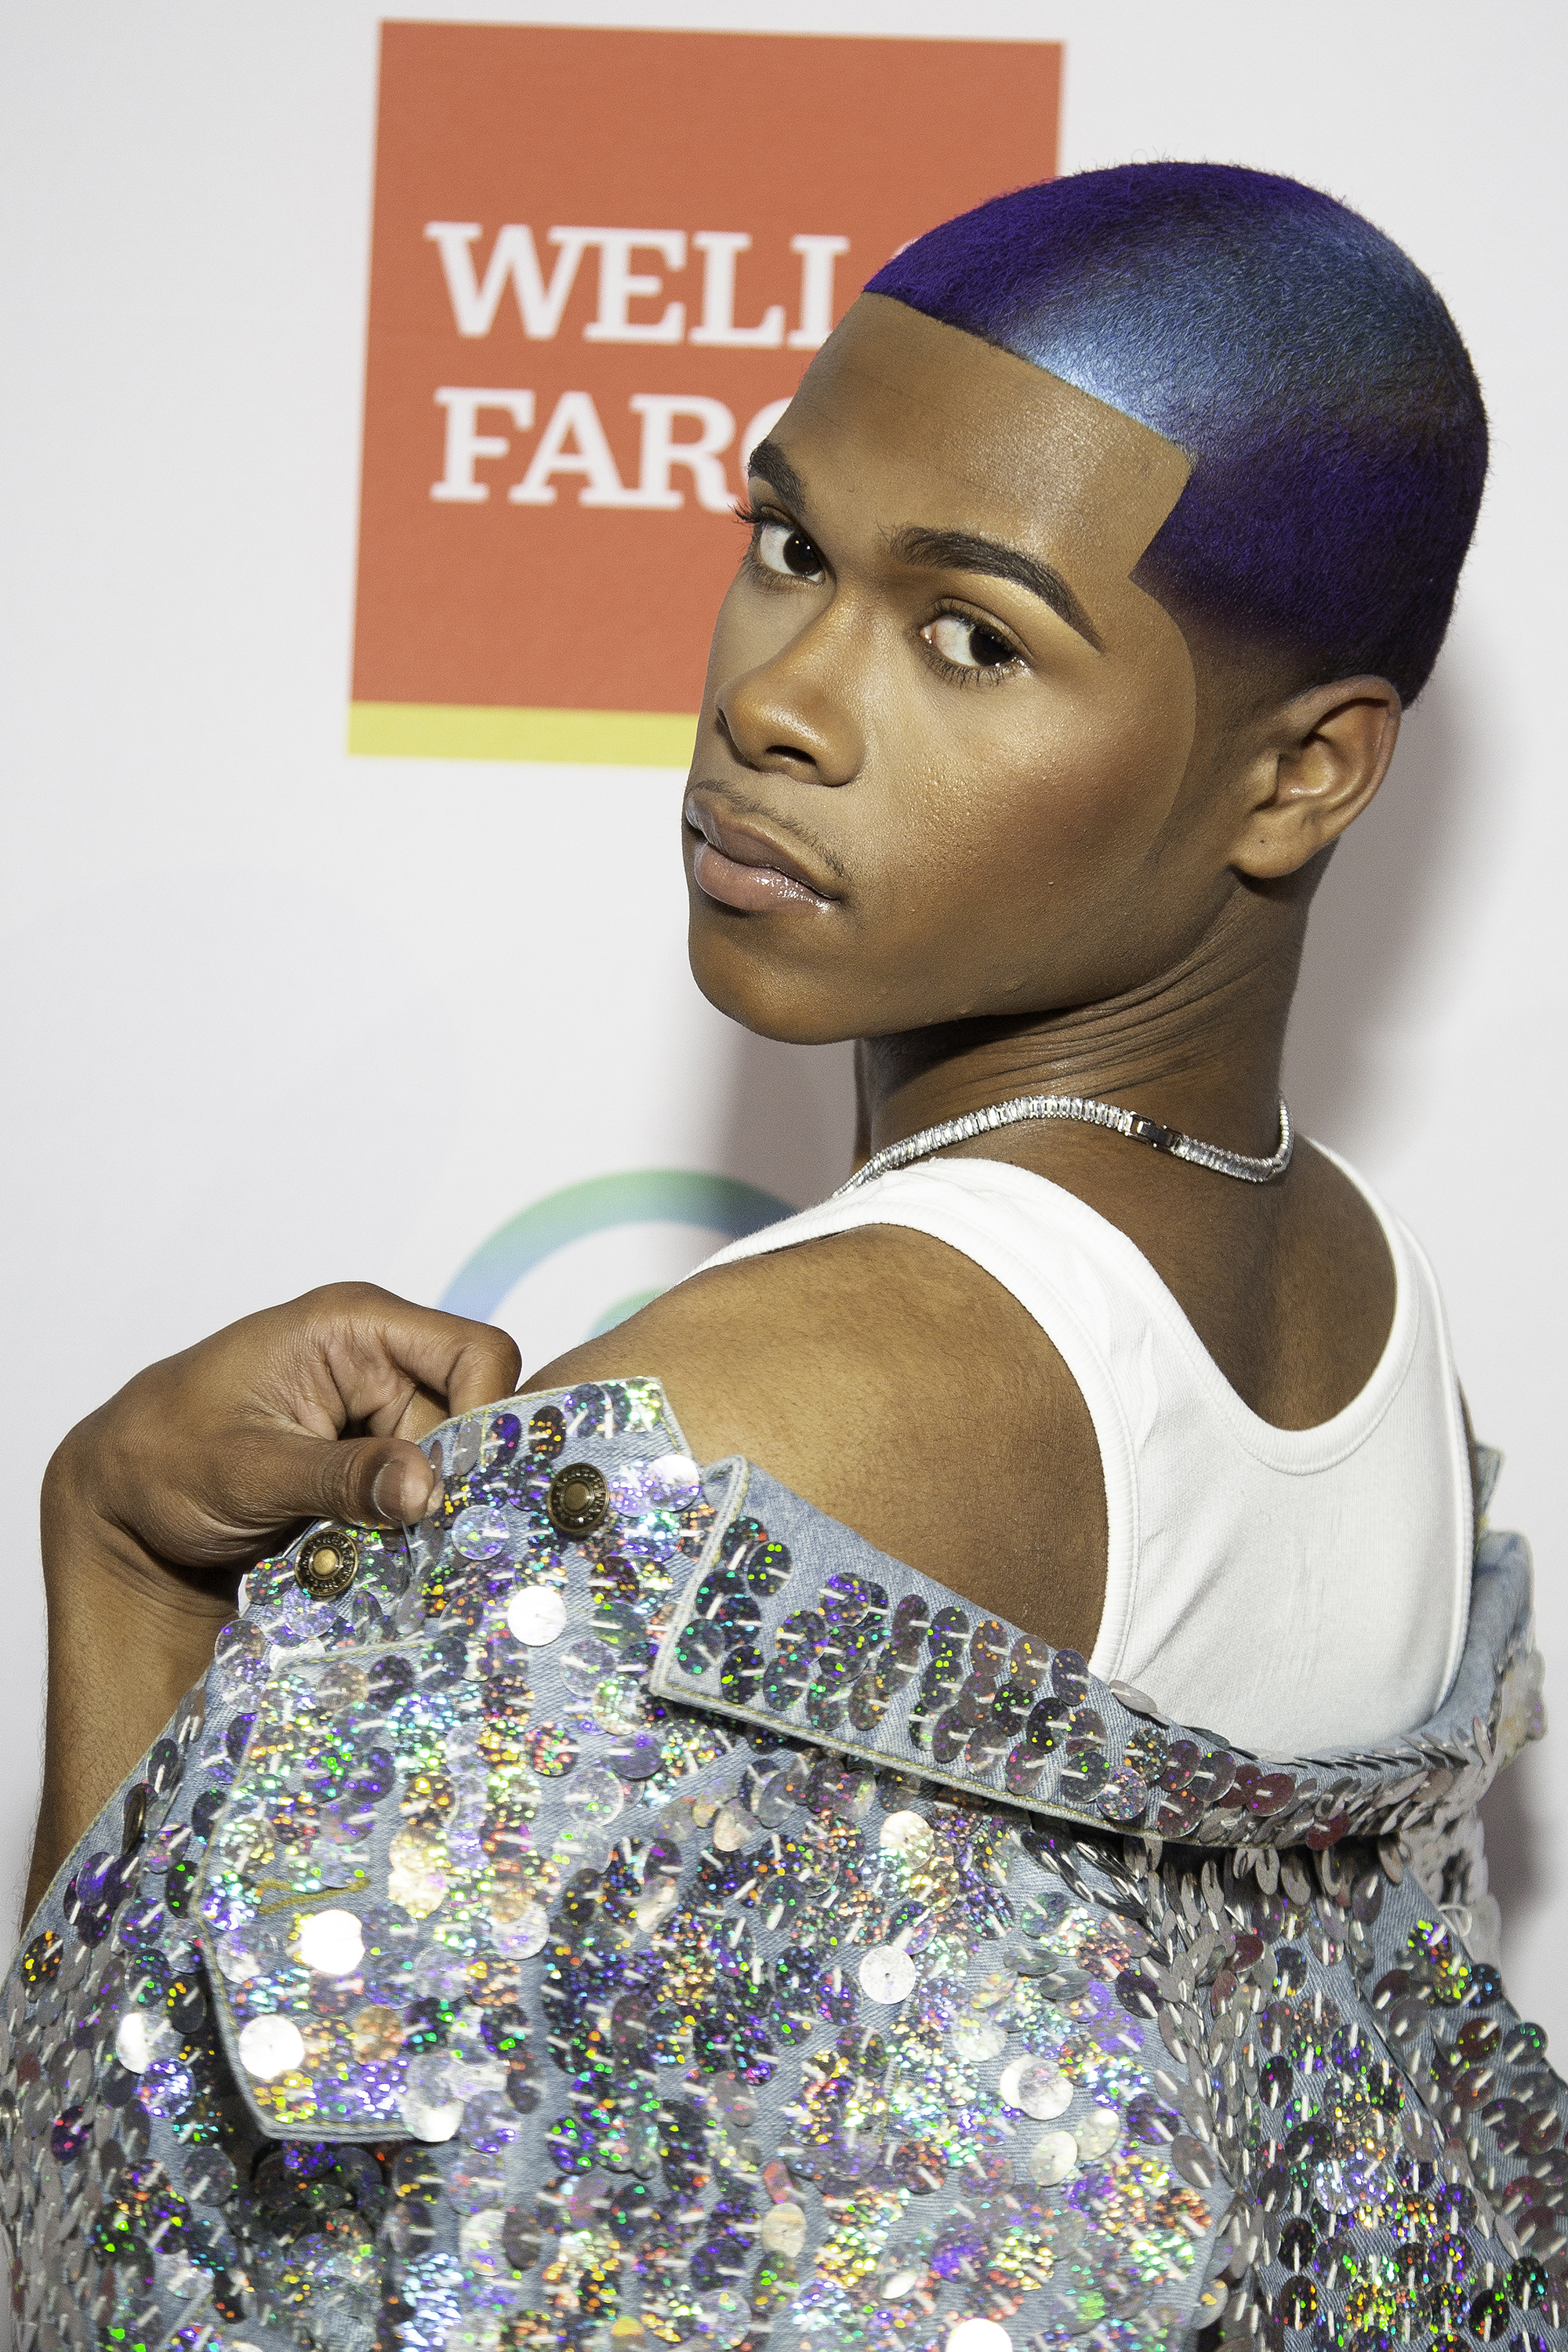 Kidd Kenn posing with a sequined outfit and a blue-toned hairstyle